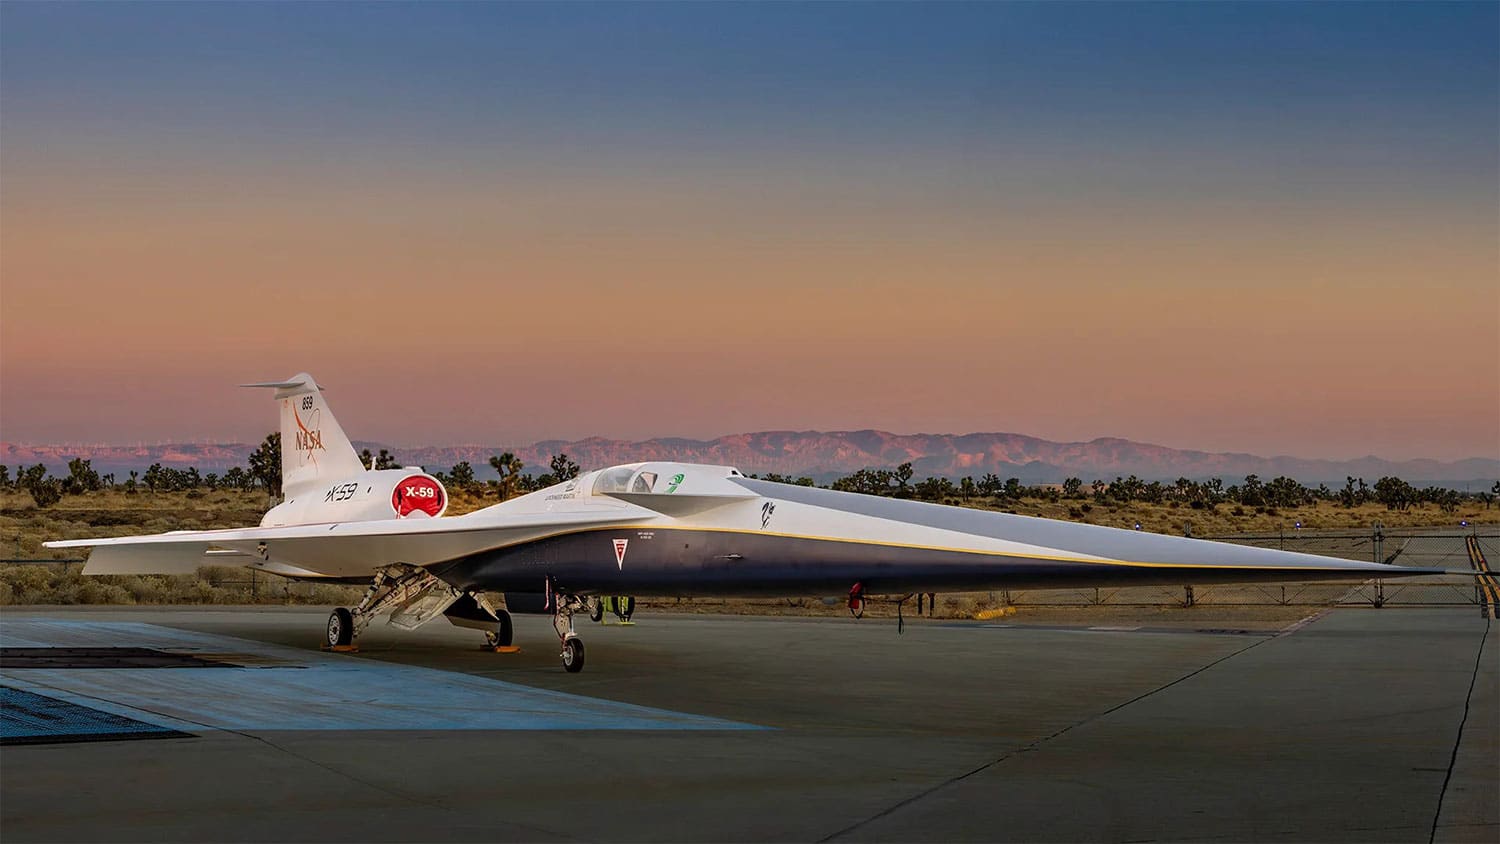 NASA’s X-59 quiet supersonic research aircraft sits on the apron outside Lockheed Martin’s Skunk Works facility at dawn in Palmdale, California.